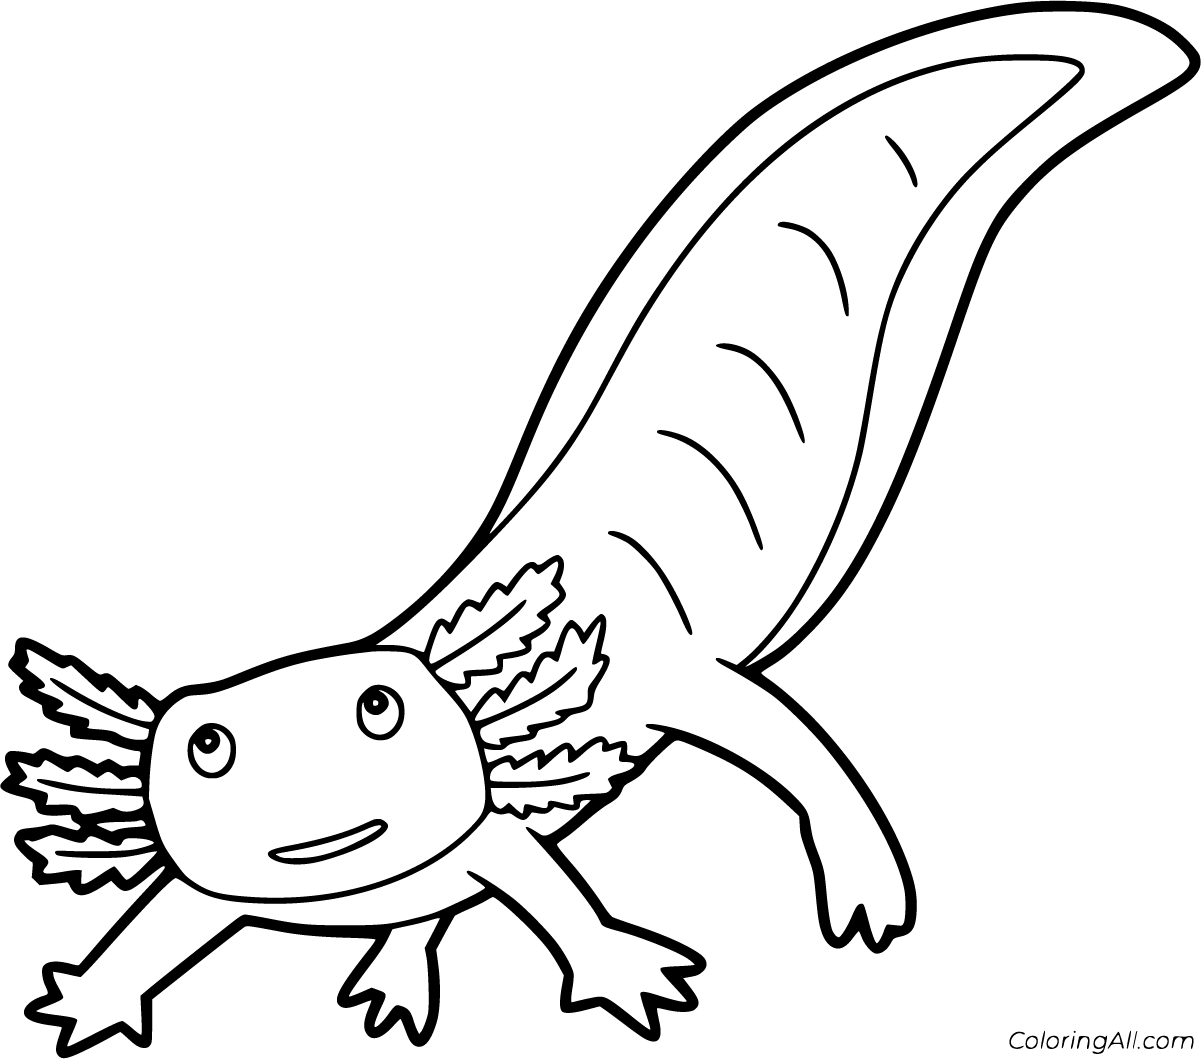 Axolotl Coloring Pages   ColoringAll